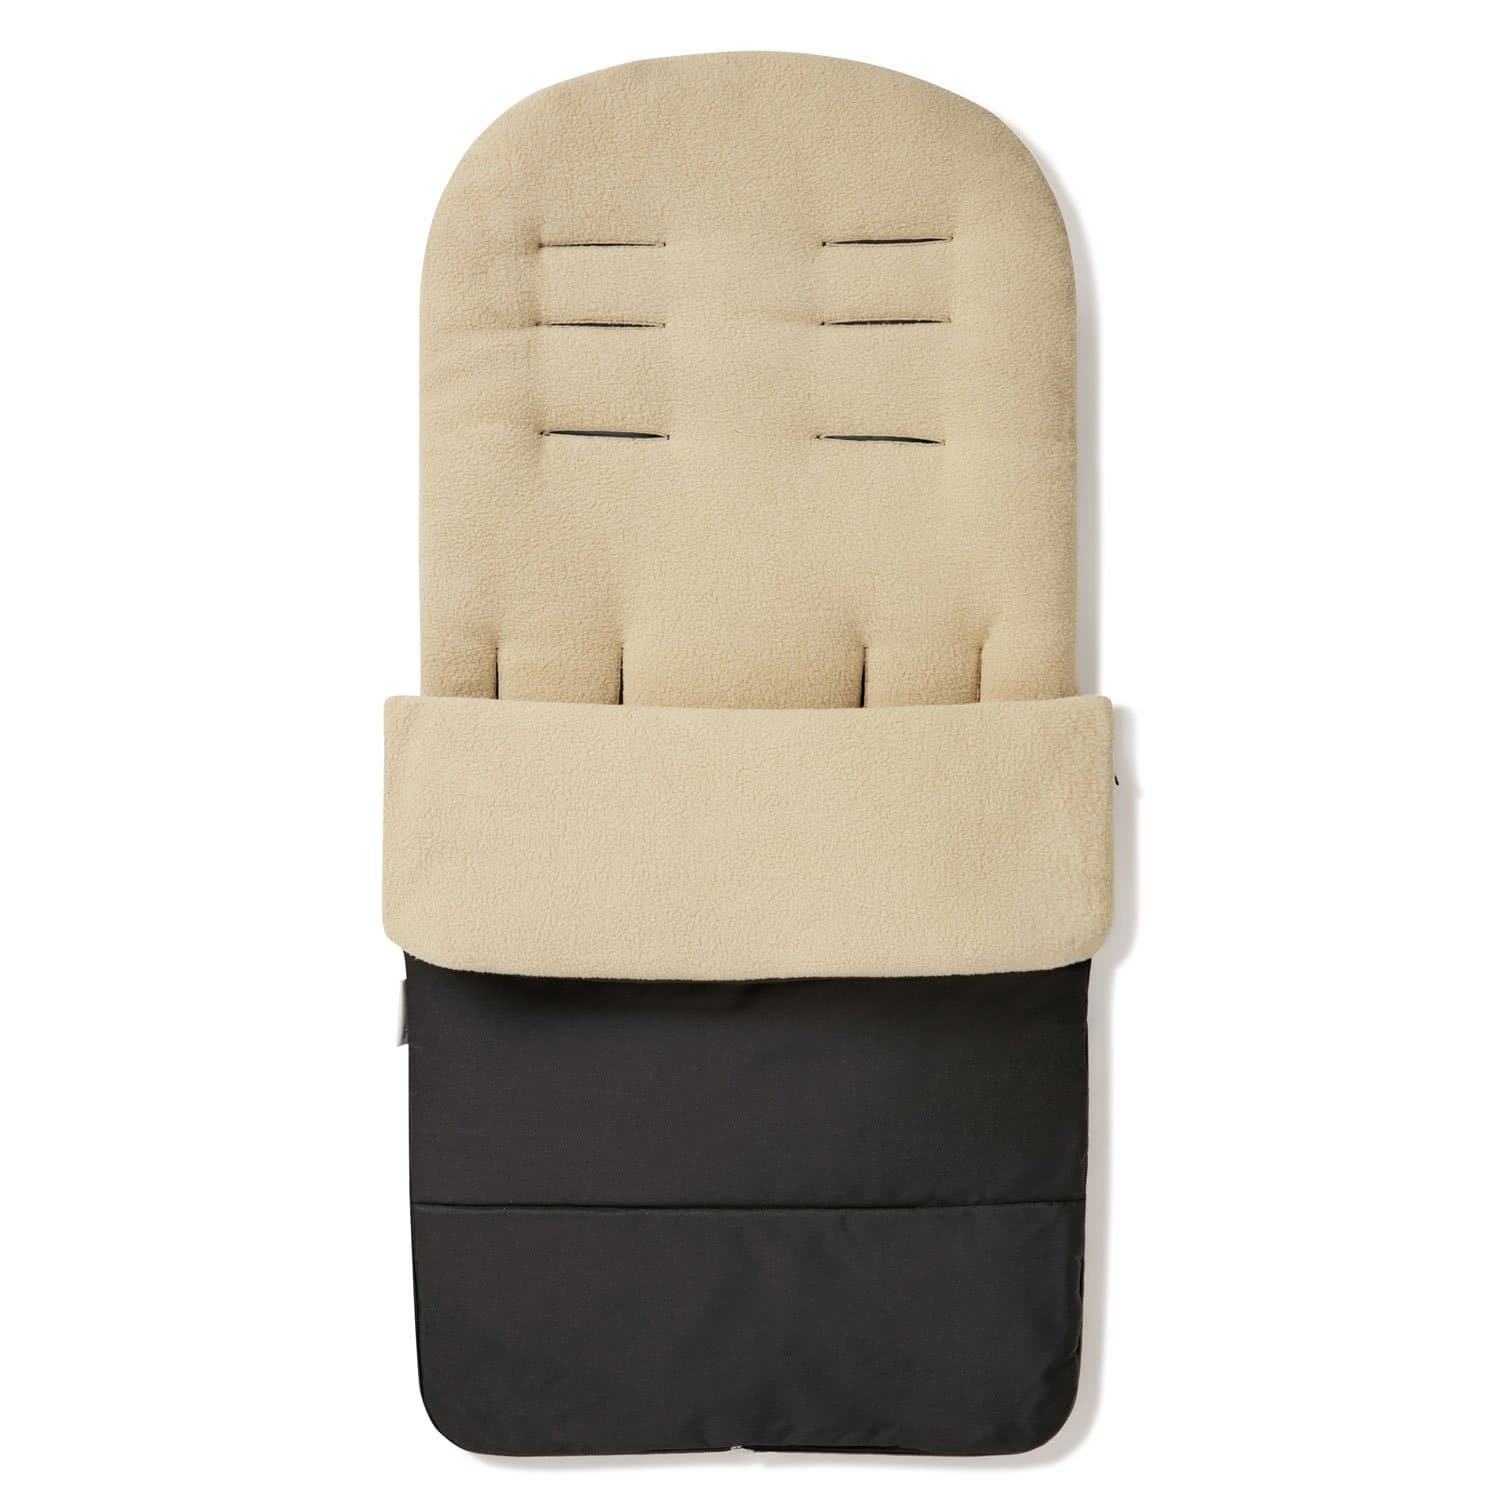 Premium Footmuff / Cosy Toes Compatible with Casual - Desert Sand / Fits All Models | For Your Little One